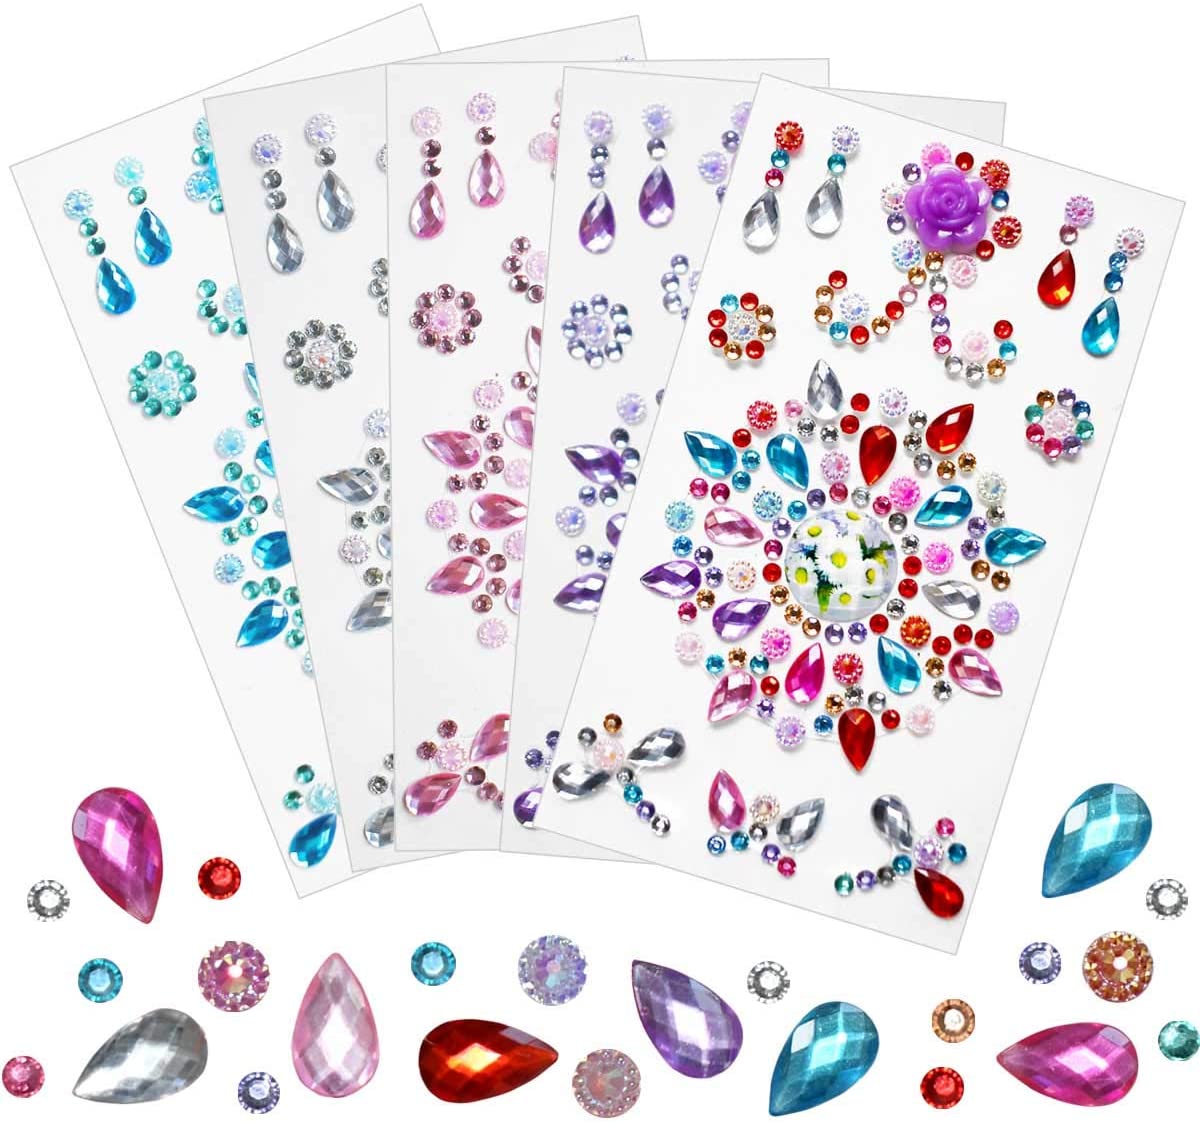 5 Sheets Jewels Stickers Self-Adhesive Craft Jewels and Gems Assorted Size Crystal Gem Flatback Sticker Mixed Shapes Rhinestone for Crafts Bling Jewel for DIY Crafts Arts Projects Nail Body Multicolor